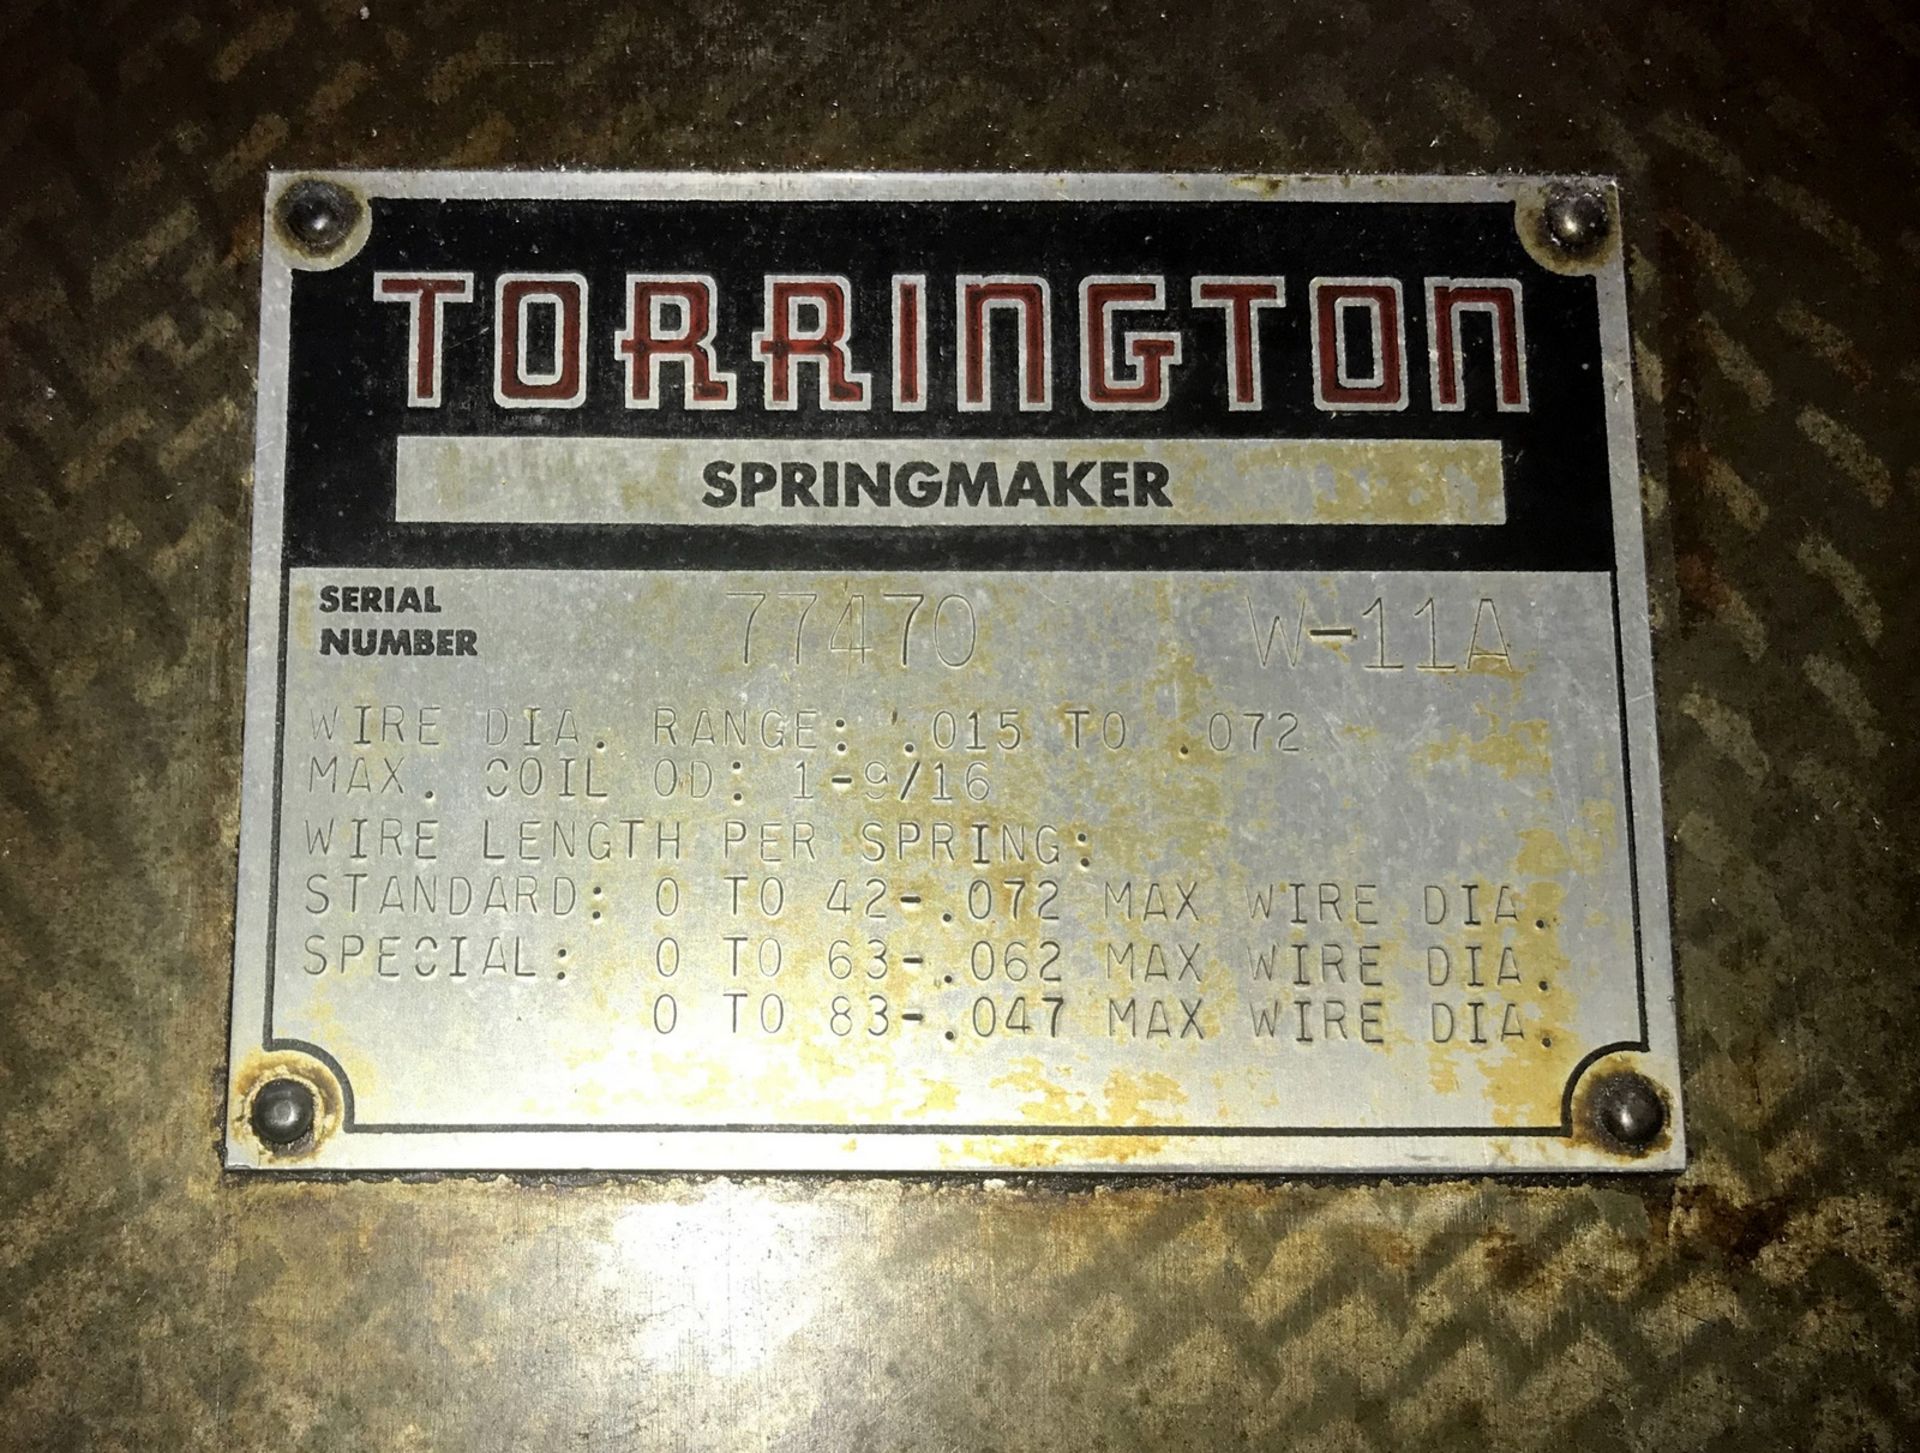 Torrington Mdl. W11A Spring Coiler, Wire Diameter .015" to .072", Max Coil OD 1-9/16", S/N 77470 - Image 5 of 5